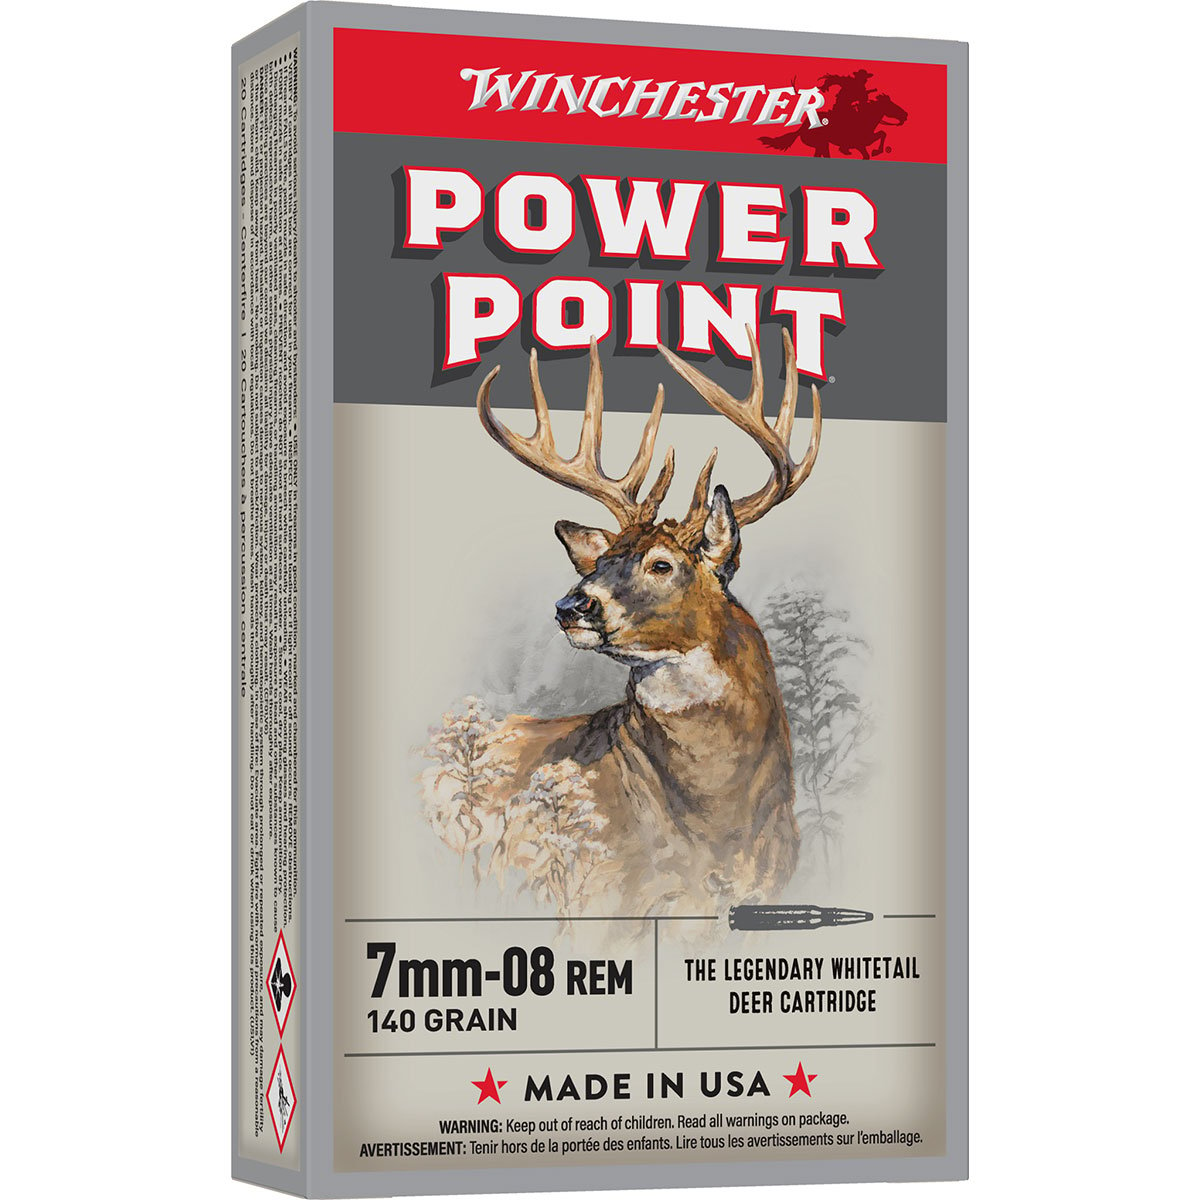 WINCHESTER - POWER POINT 7MM-08 REMINGTON RIFLE AMMO